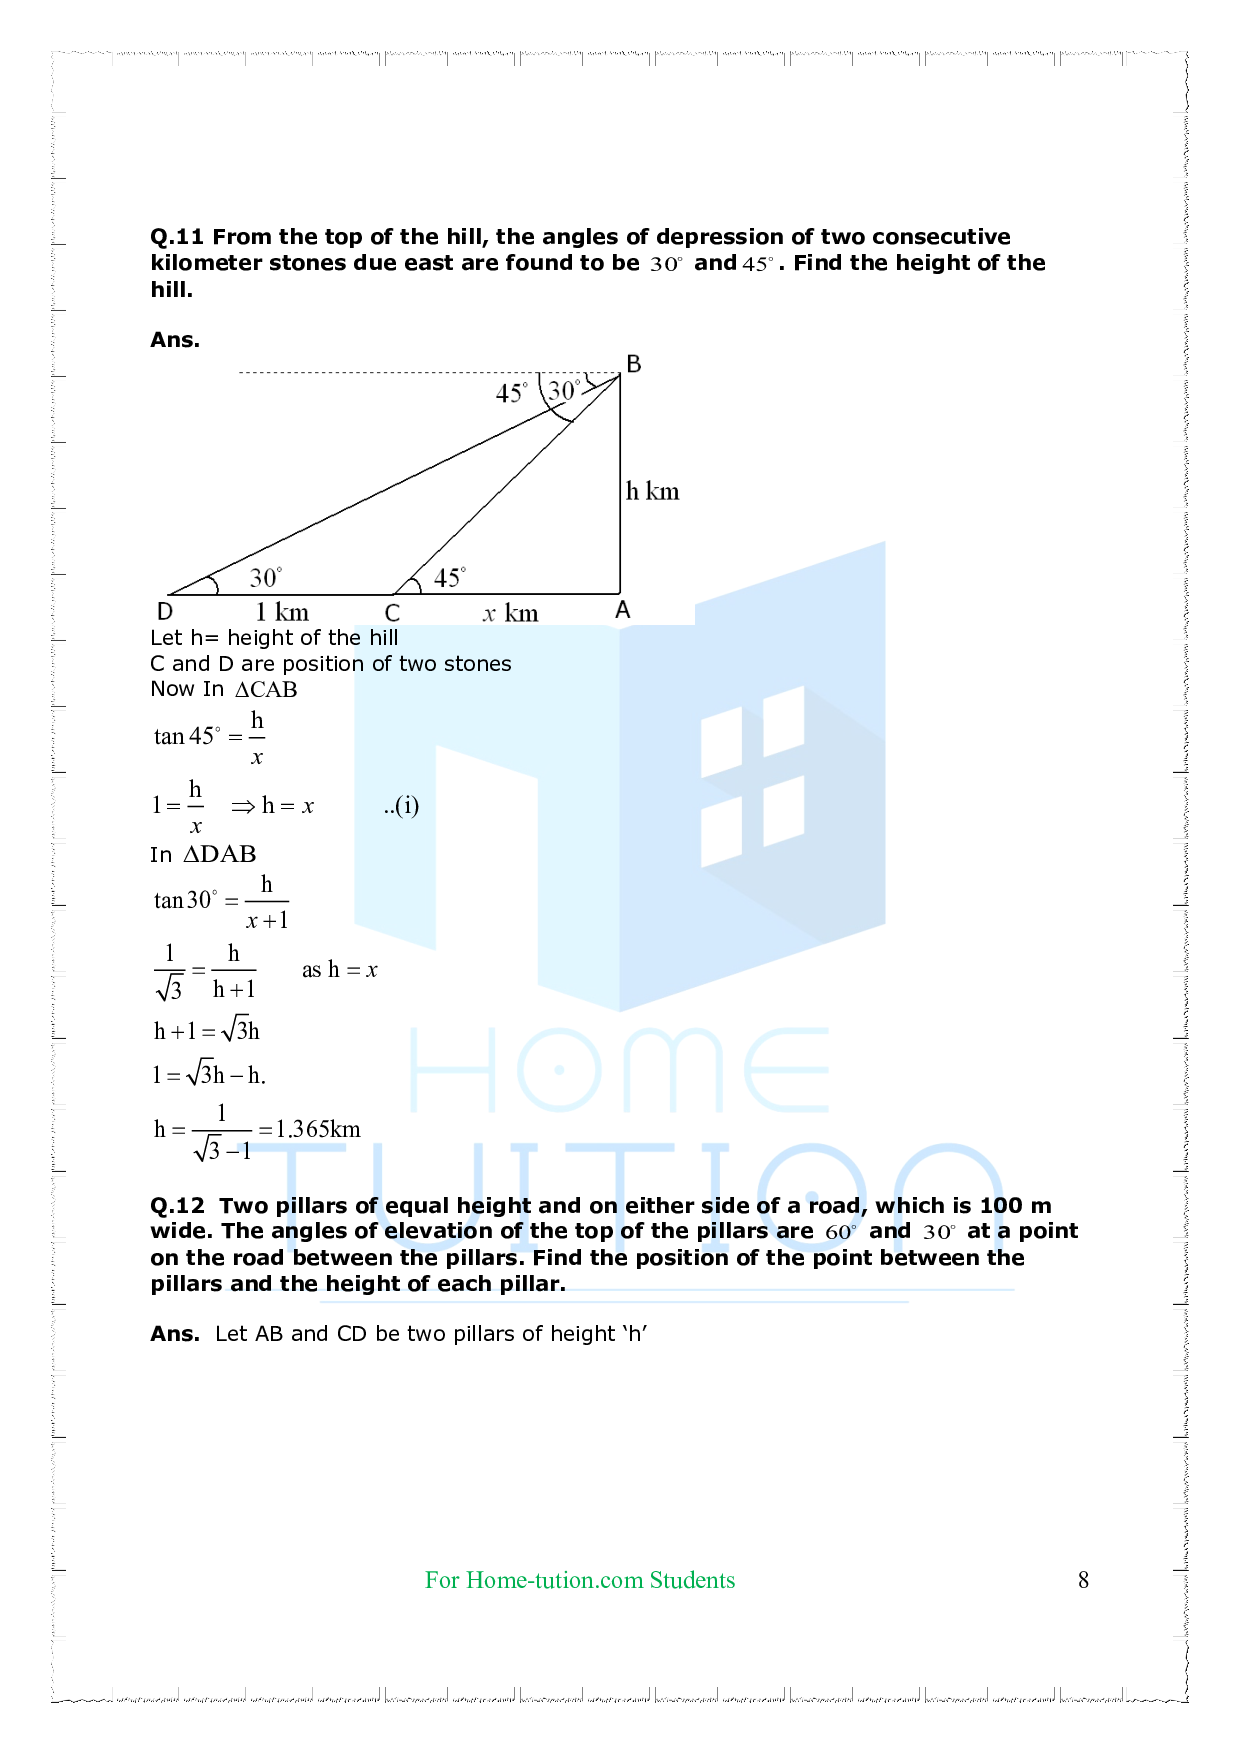 Chapter-9 Some Applications of Trigonometry Questions